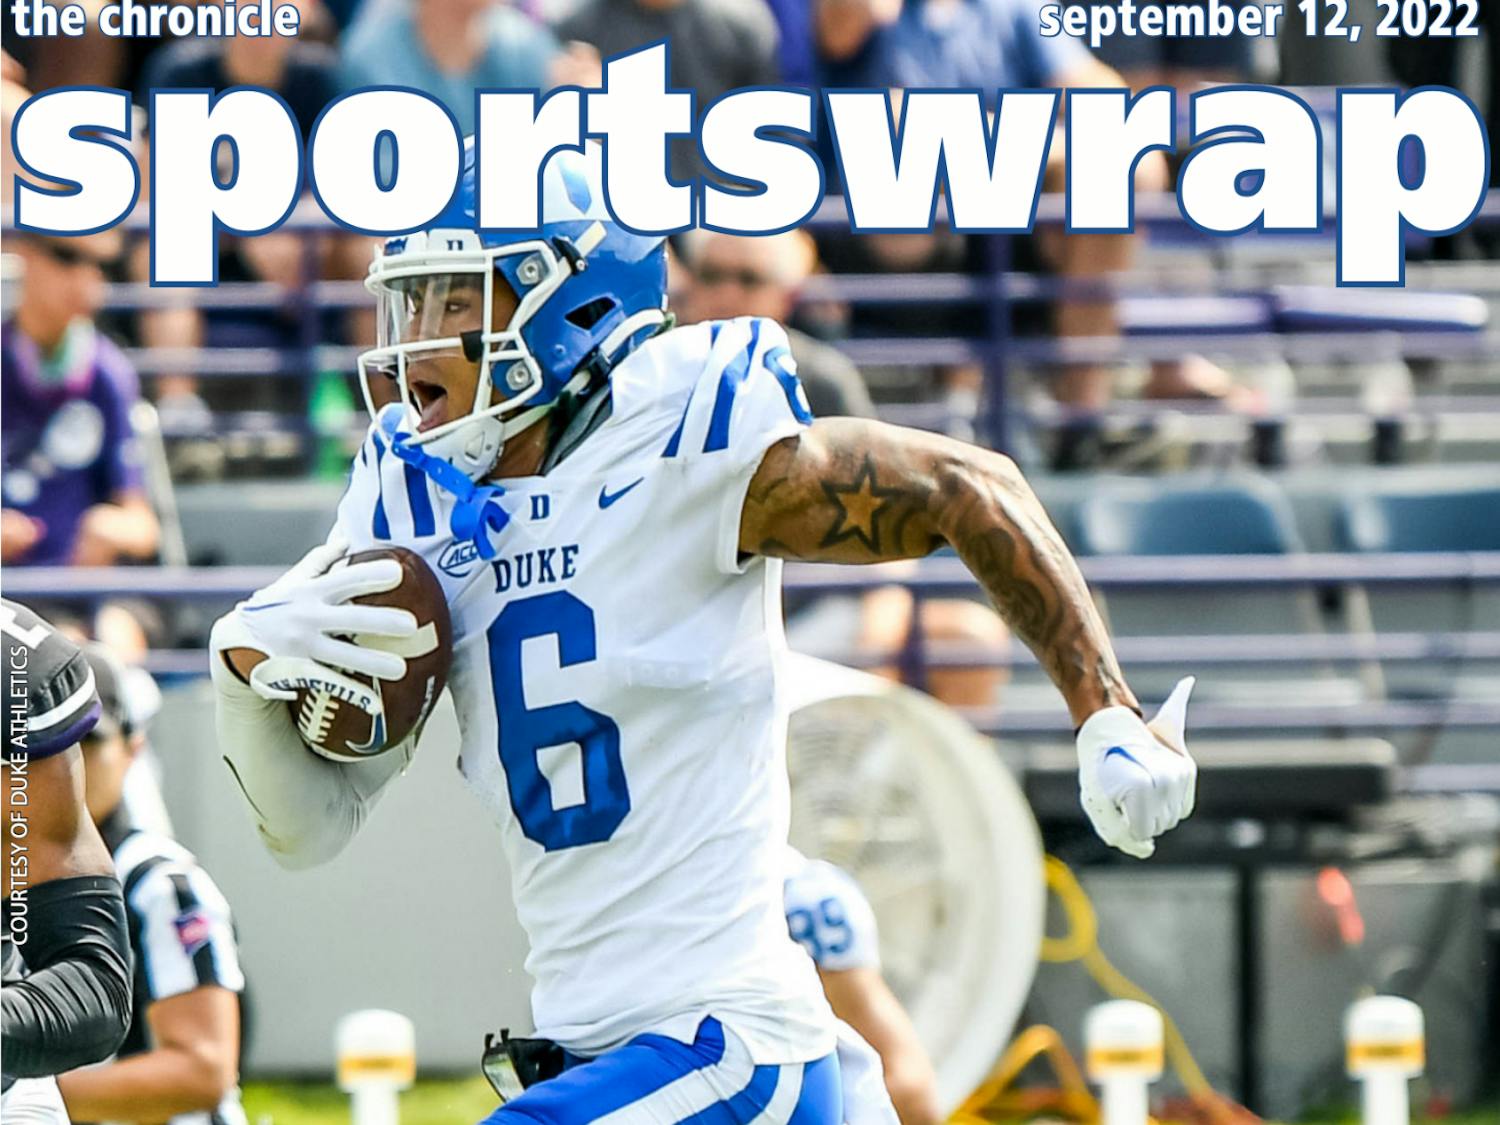 Duke football won its road opener Saturday against Northwestern in a game that came down to the wire.